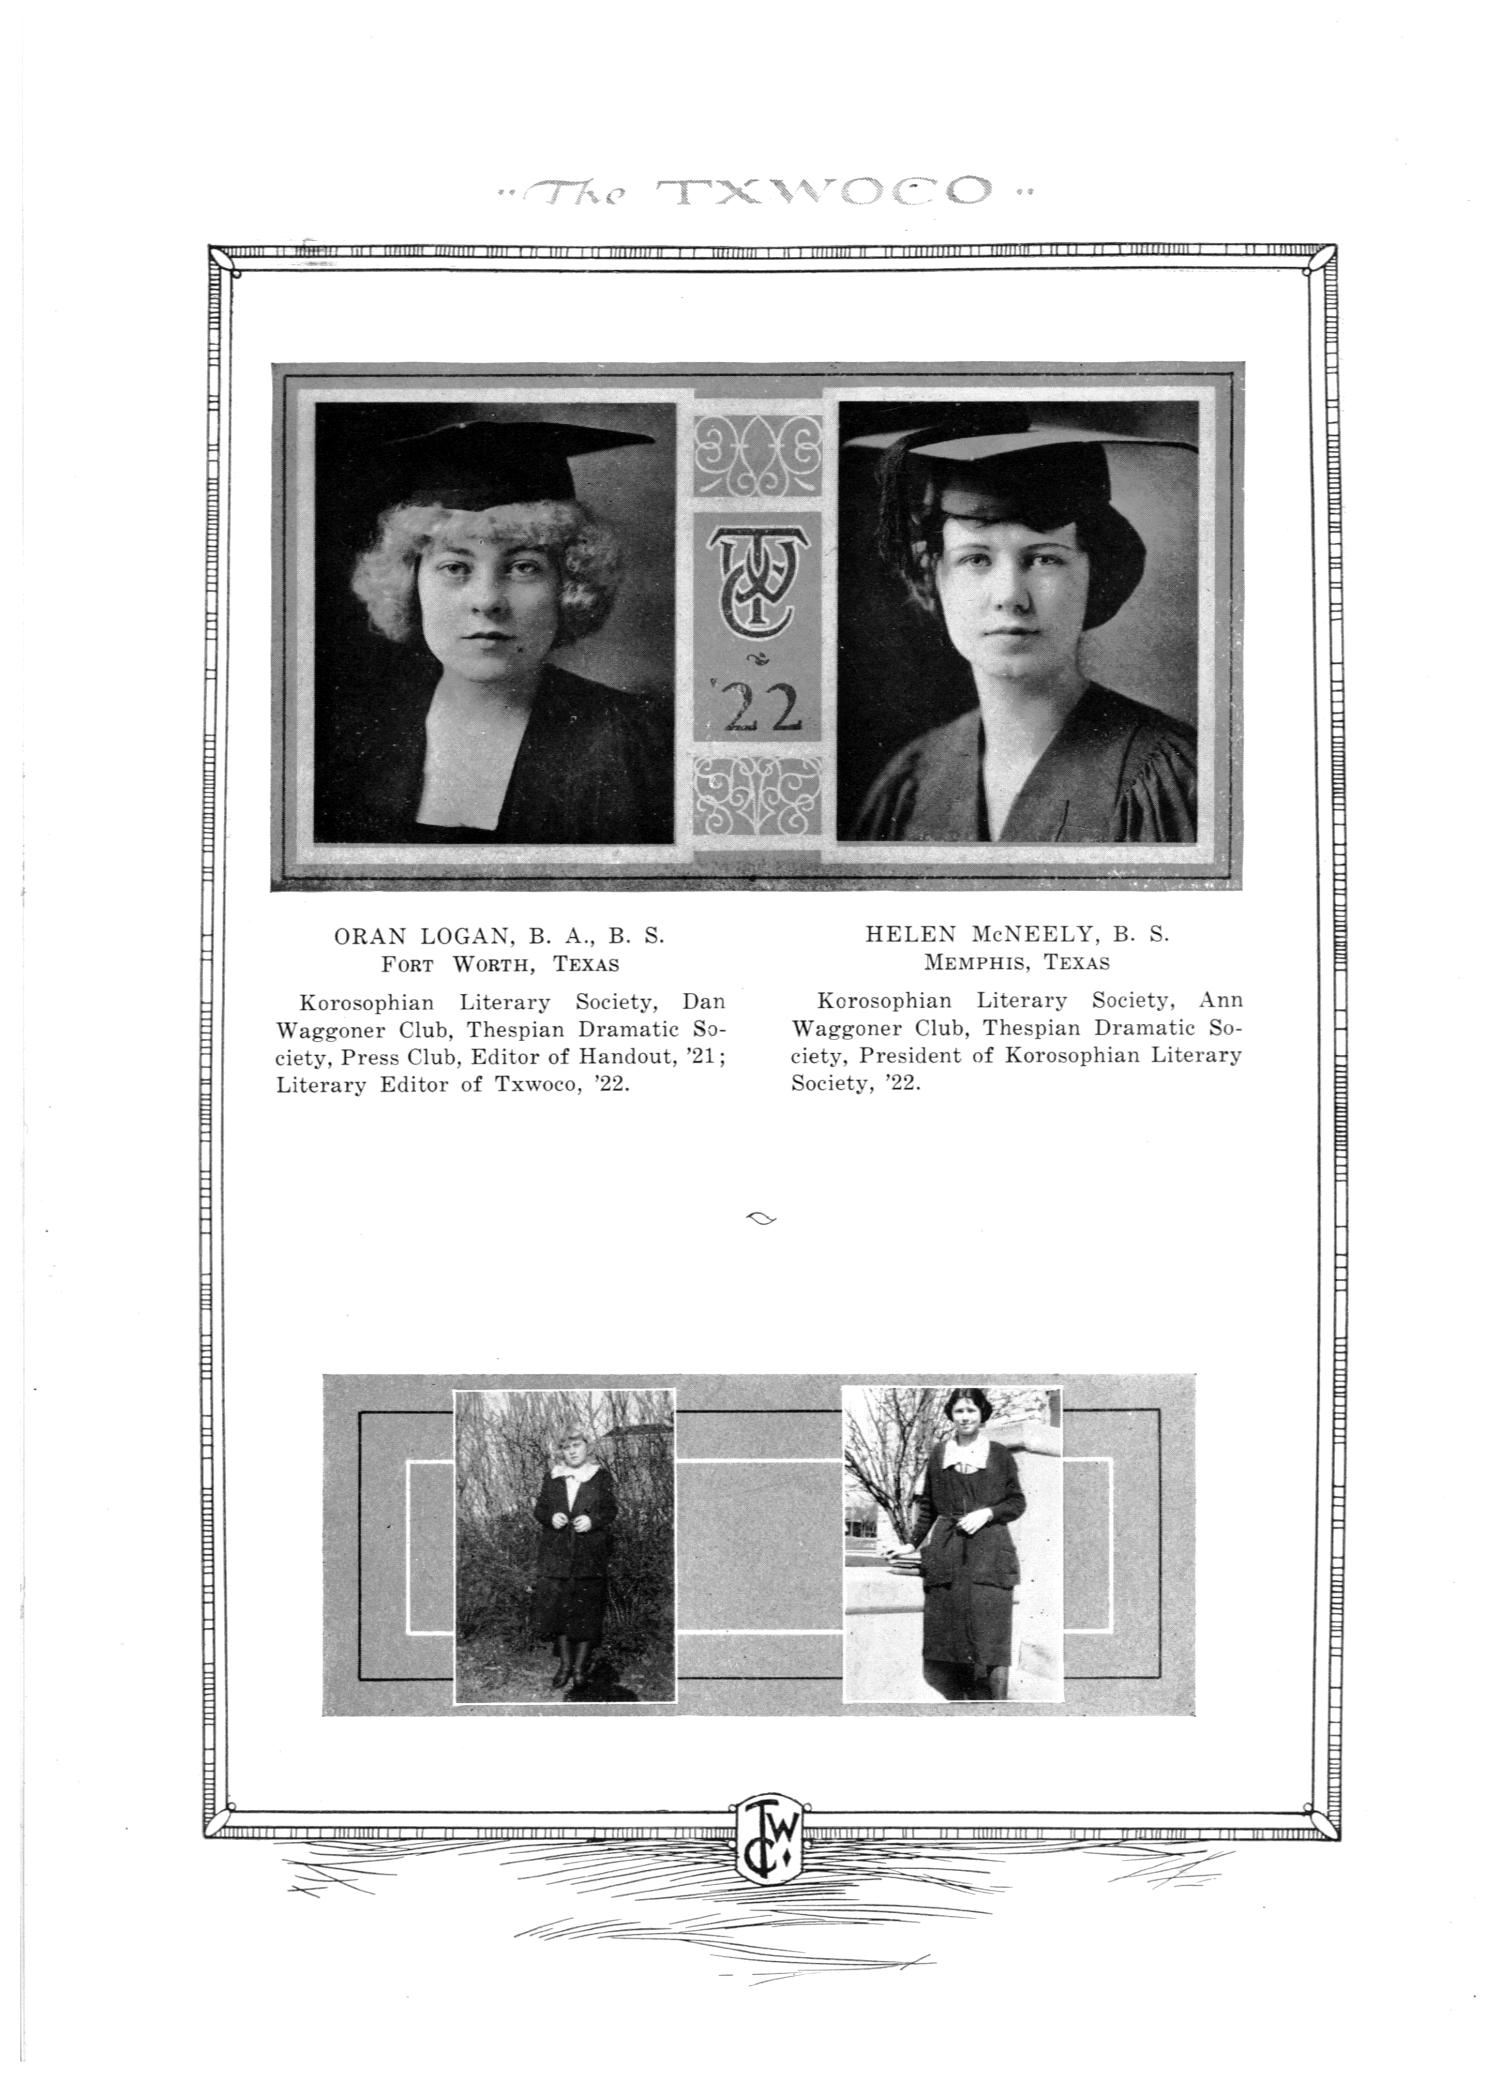 TXWOCO, Yearbook of Texas Woman's College, 1922
                                                
                                                    26
                                                